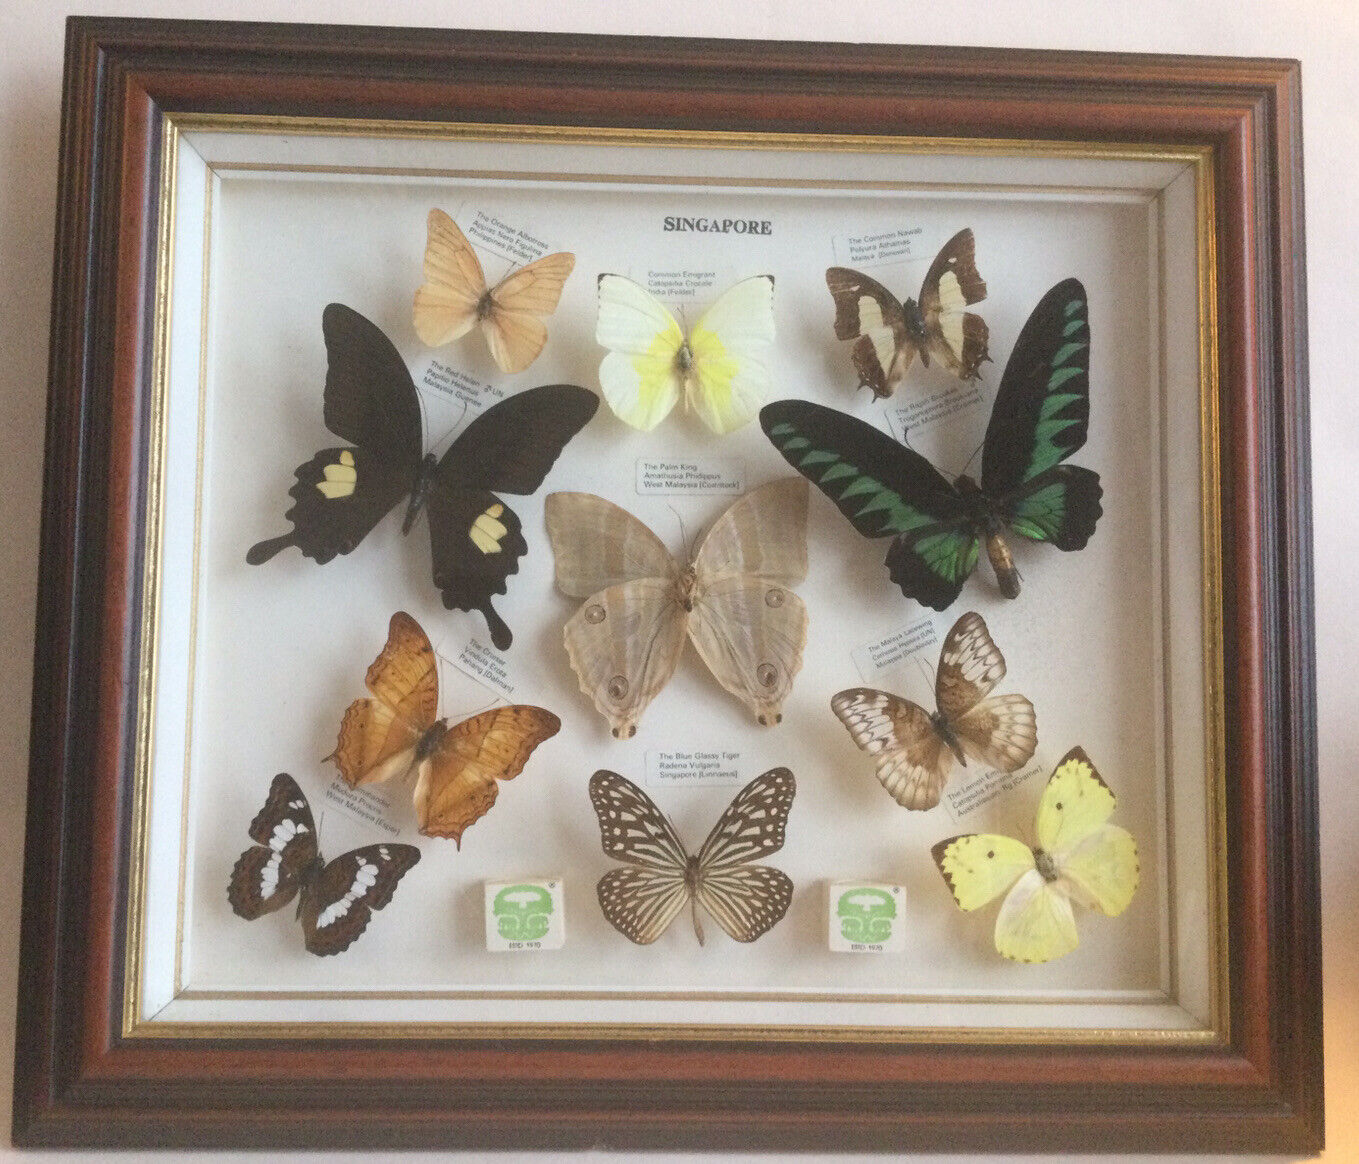 Vintage beautiful 11 framed named butterfly collection Singapore Butterflies 🦋